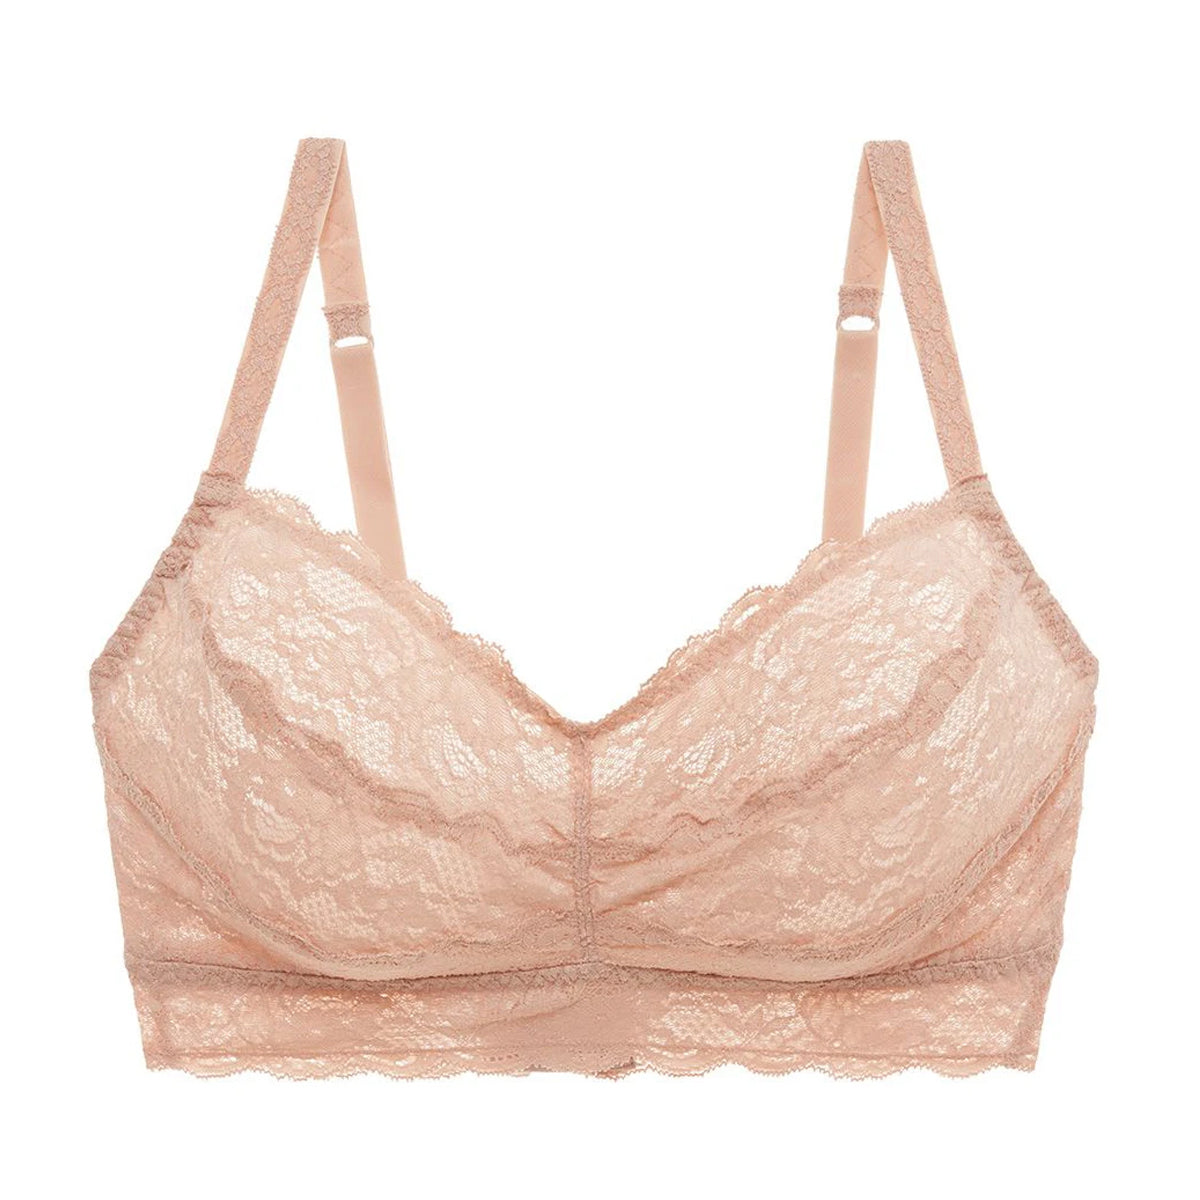 💕Sweet Nothings💕 Bra cream with lace size 36B